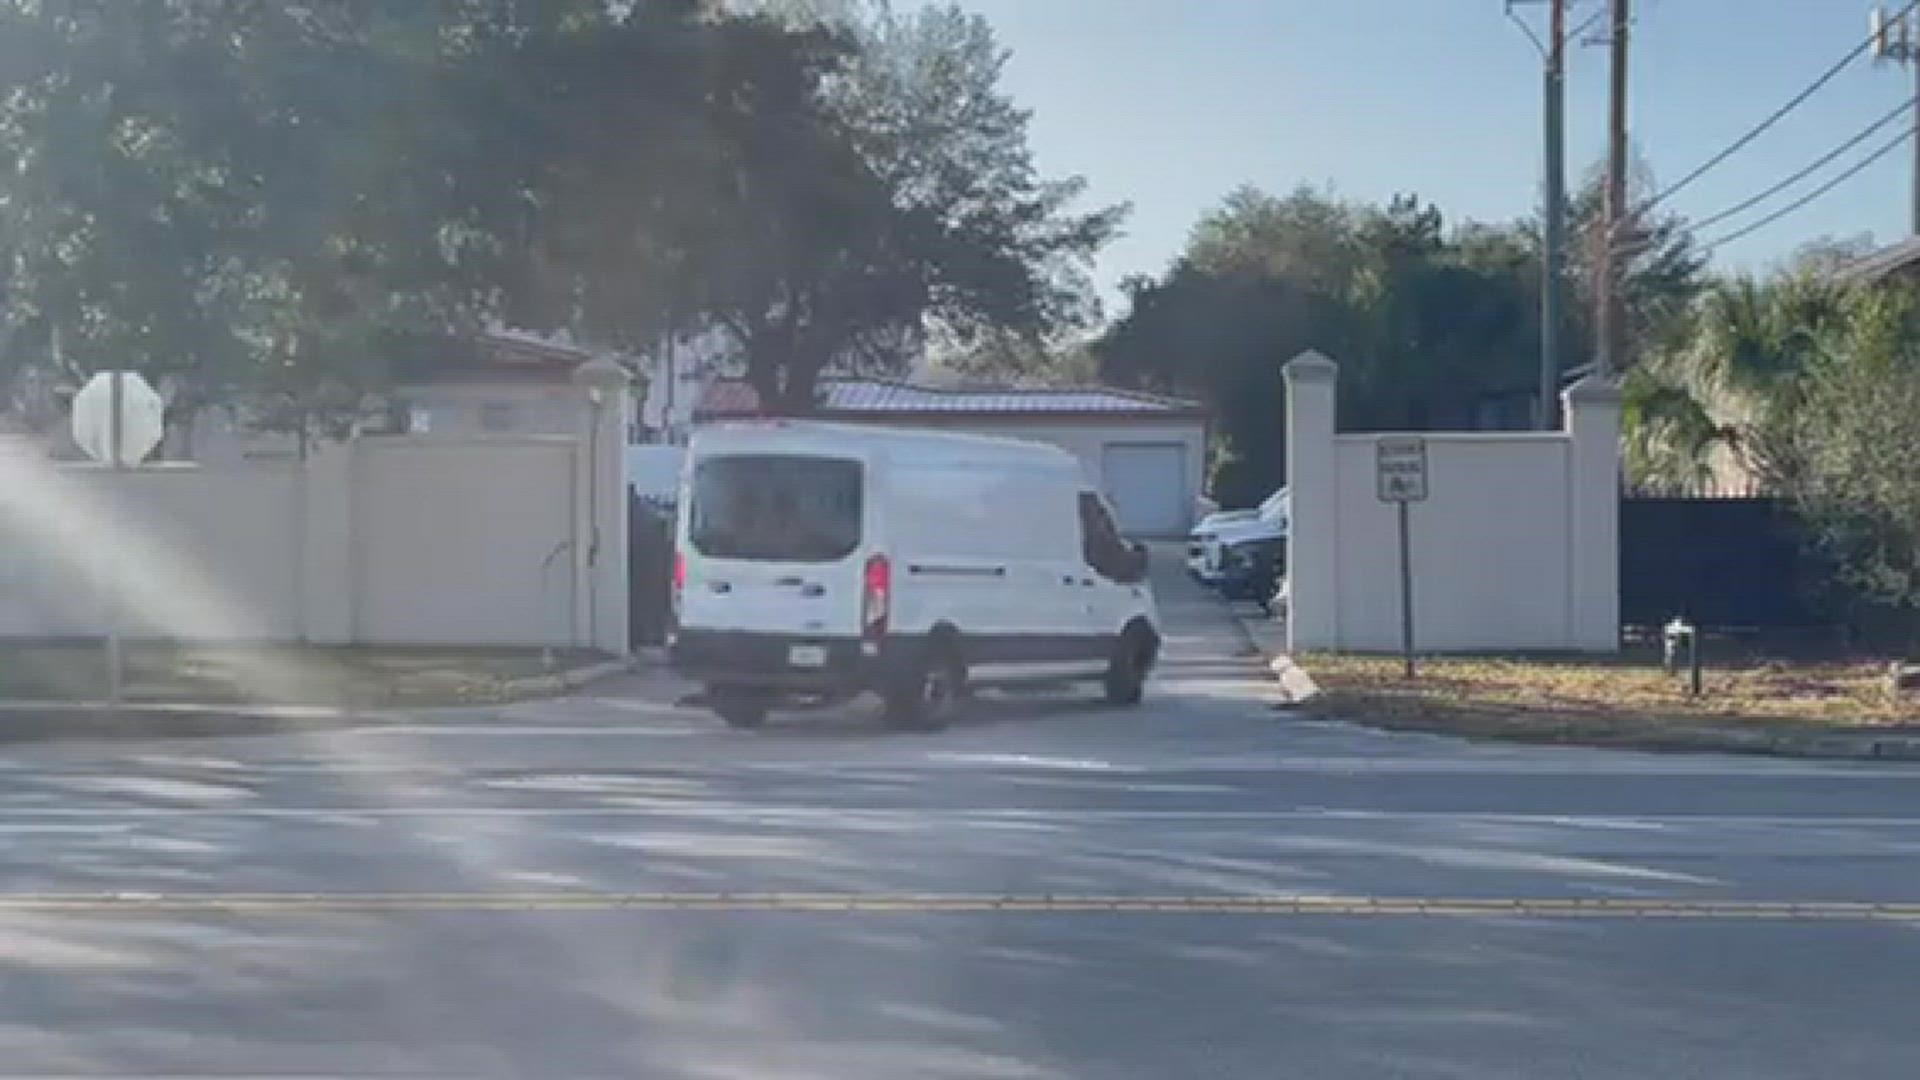 Prior to entering his guilty plea, a caravan of police vehicle, one carrying Aiden Fucci, arrived at St. Johns County courthouse Monday morning.
Credit: Renata Di Gregorio